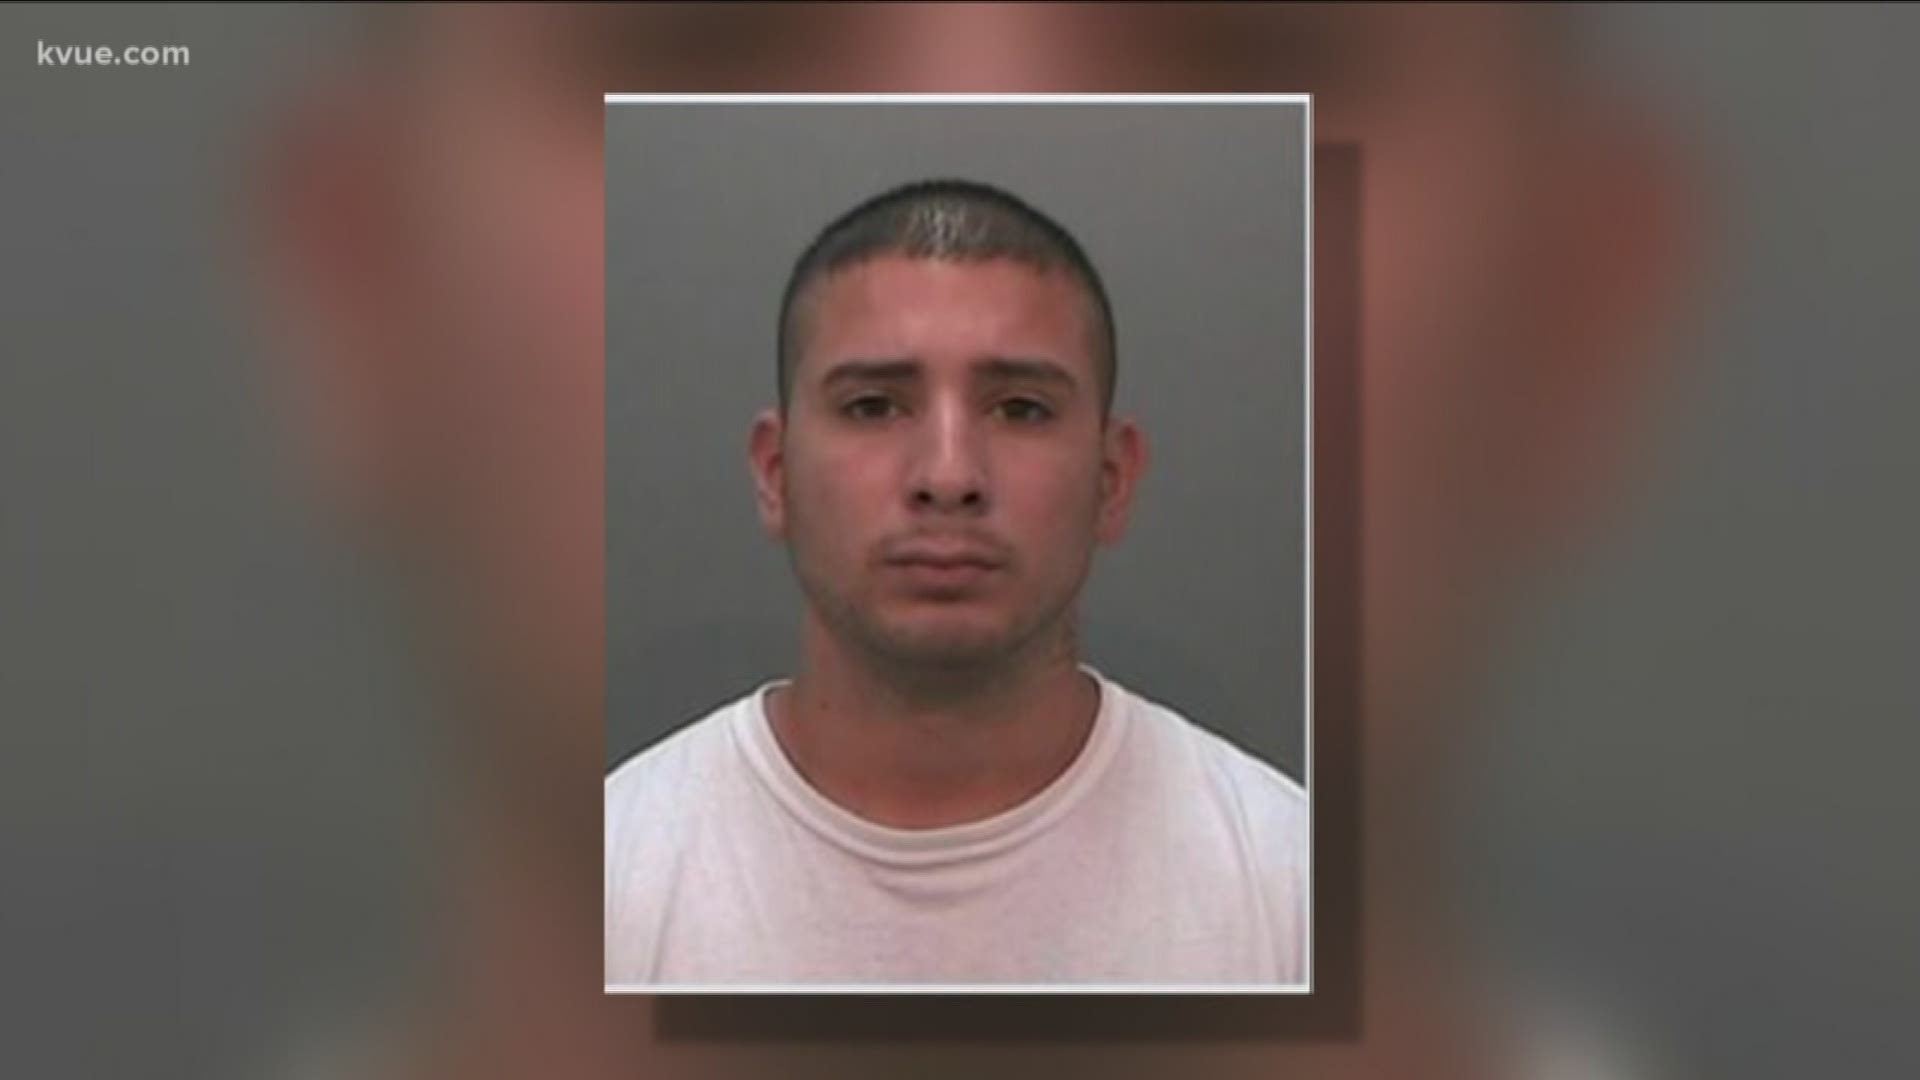 29-year-old Jose Chavez has been arrested after he allegedly broke into a dorm, stole items and watched women sleep.